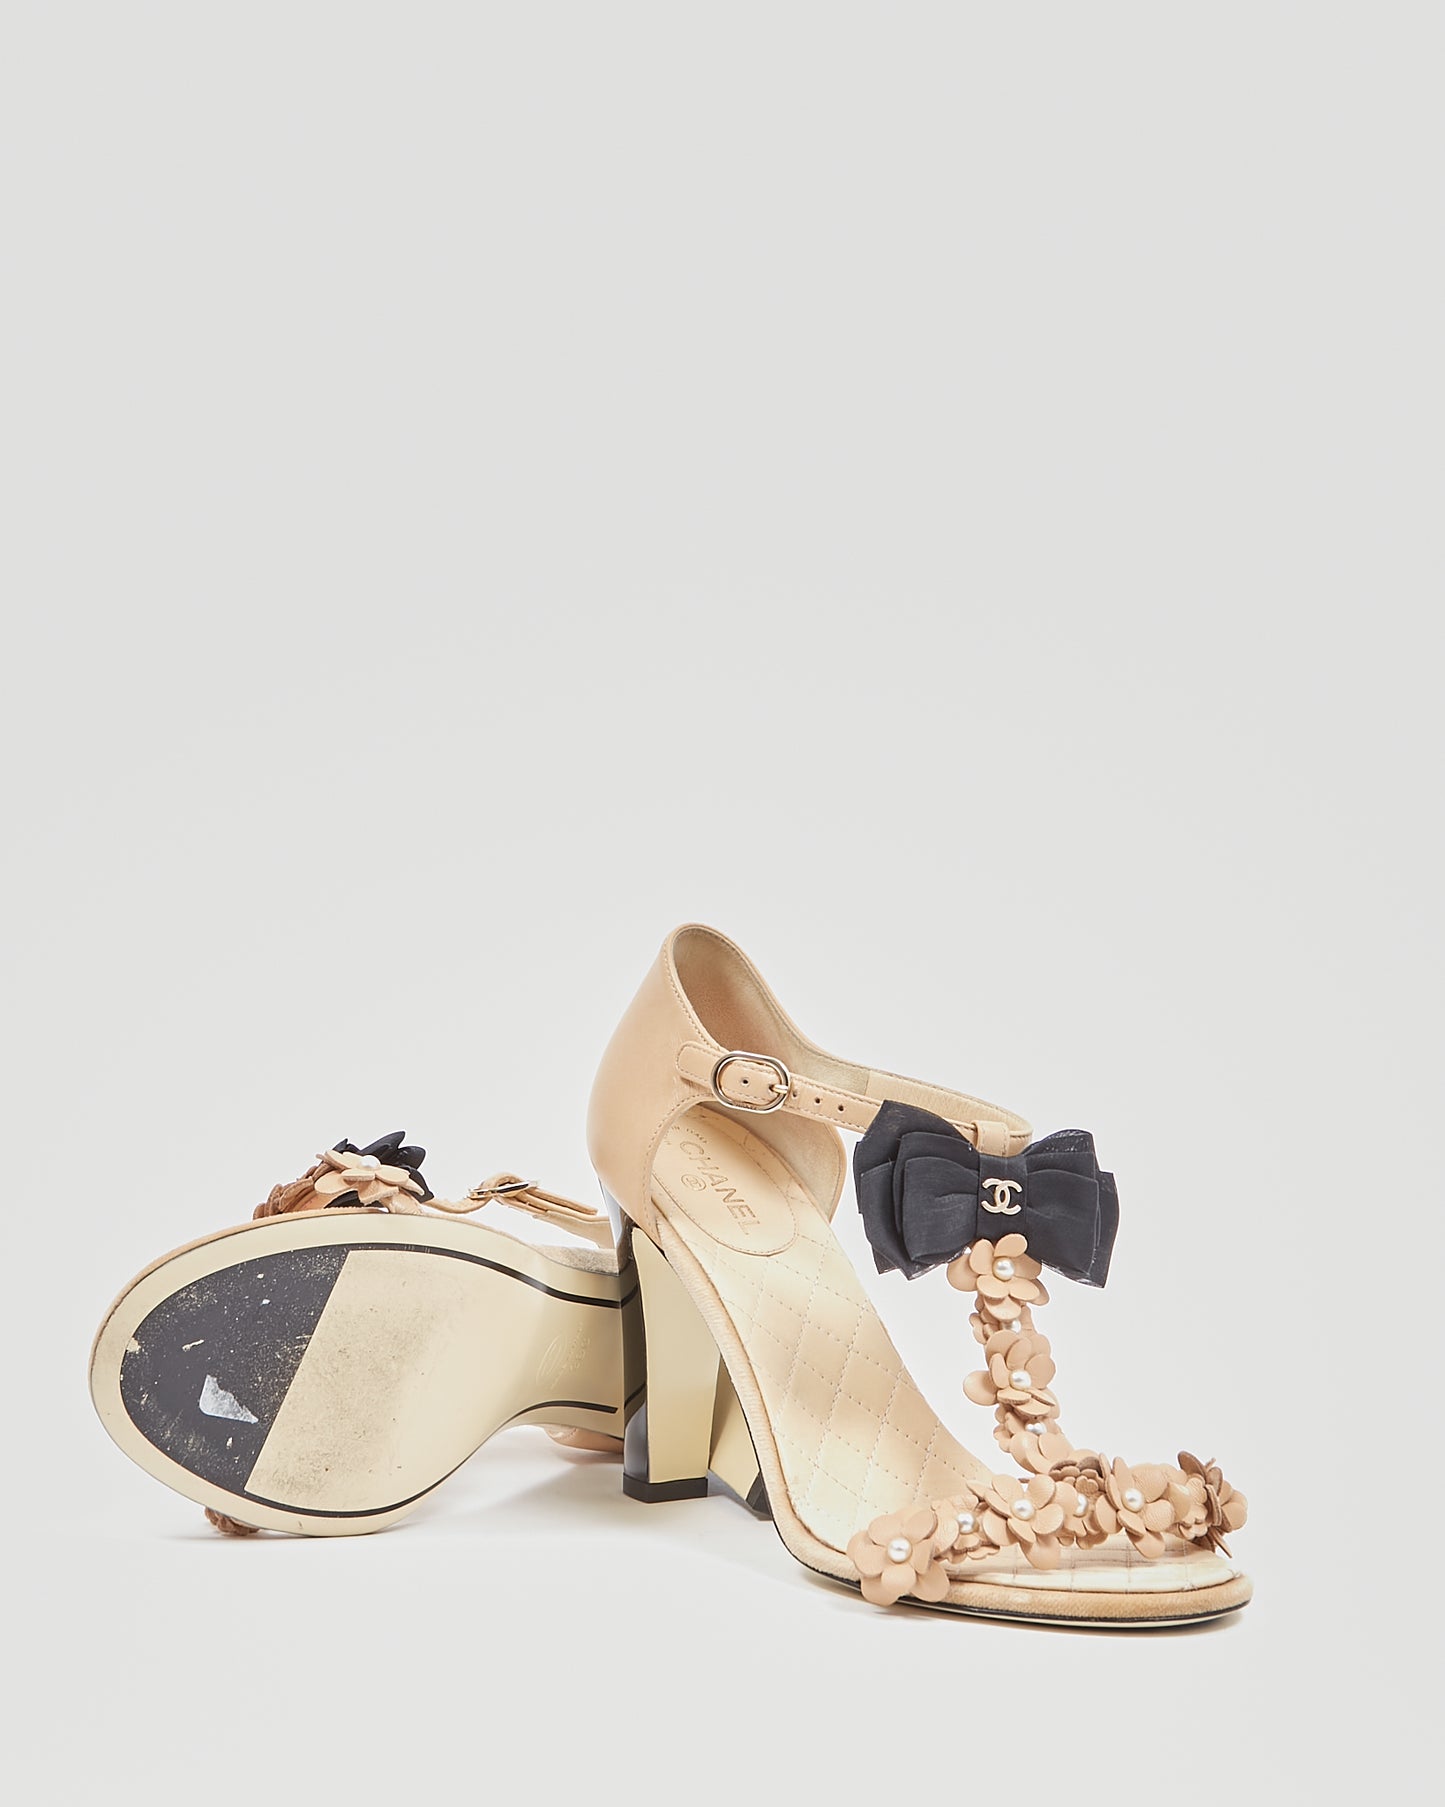 Chanel Beige with Black Bow Accent Sandal Heels - 38